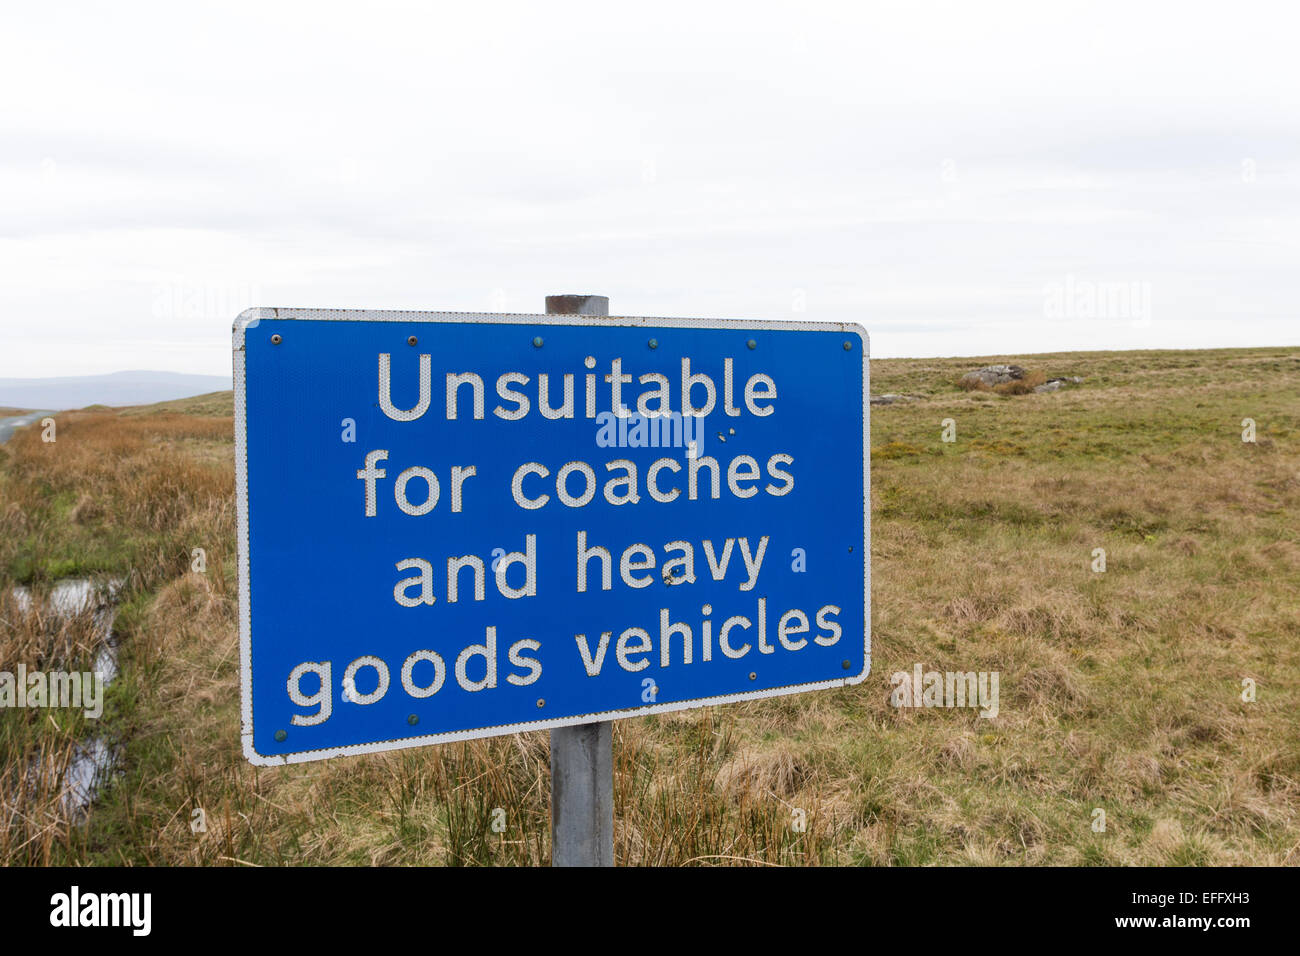 Road Sign Informing Drivers the Road is Unsuitable for Coaches and Heavy Goods Vehicles, Tan Hill, North Yorkshire UK Stock Photo